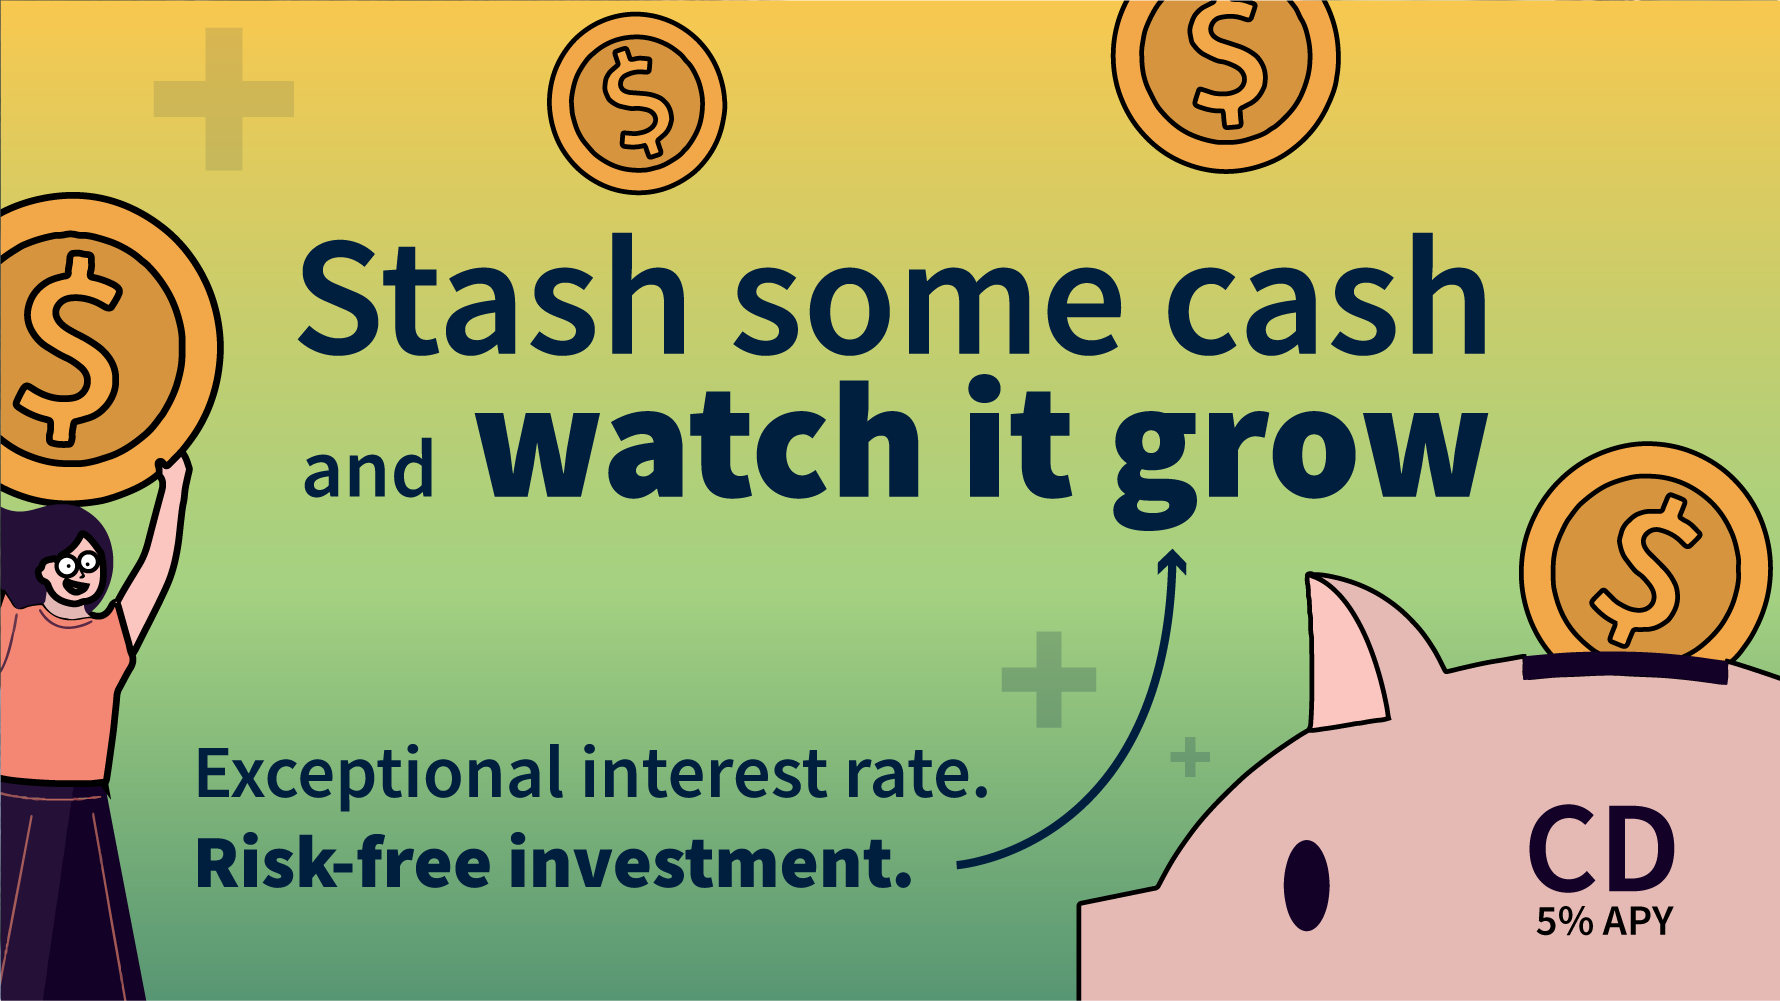 Stash some cash and watch it grow. Exceptional interest rate. Risk free investment.